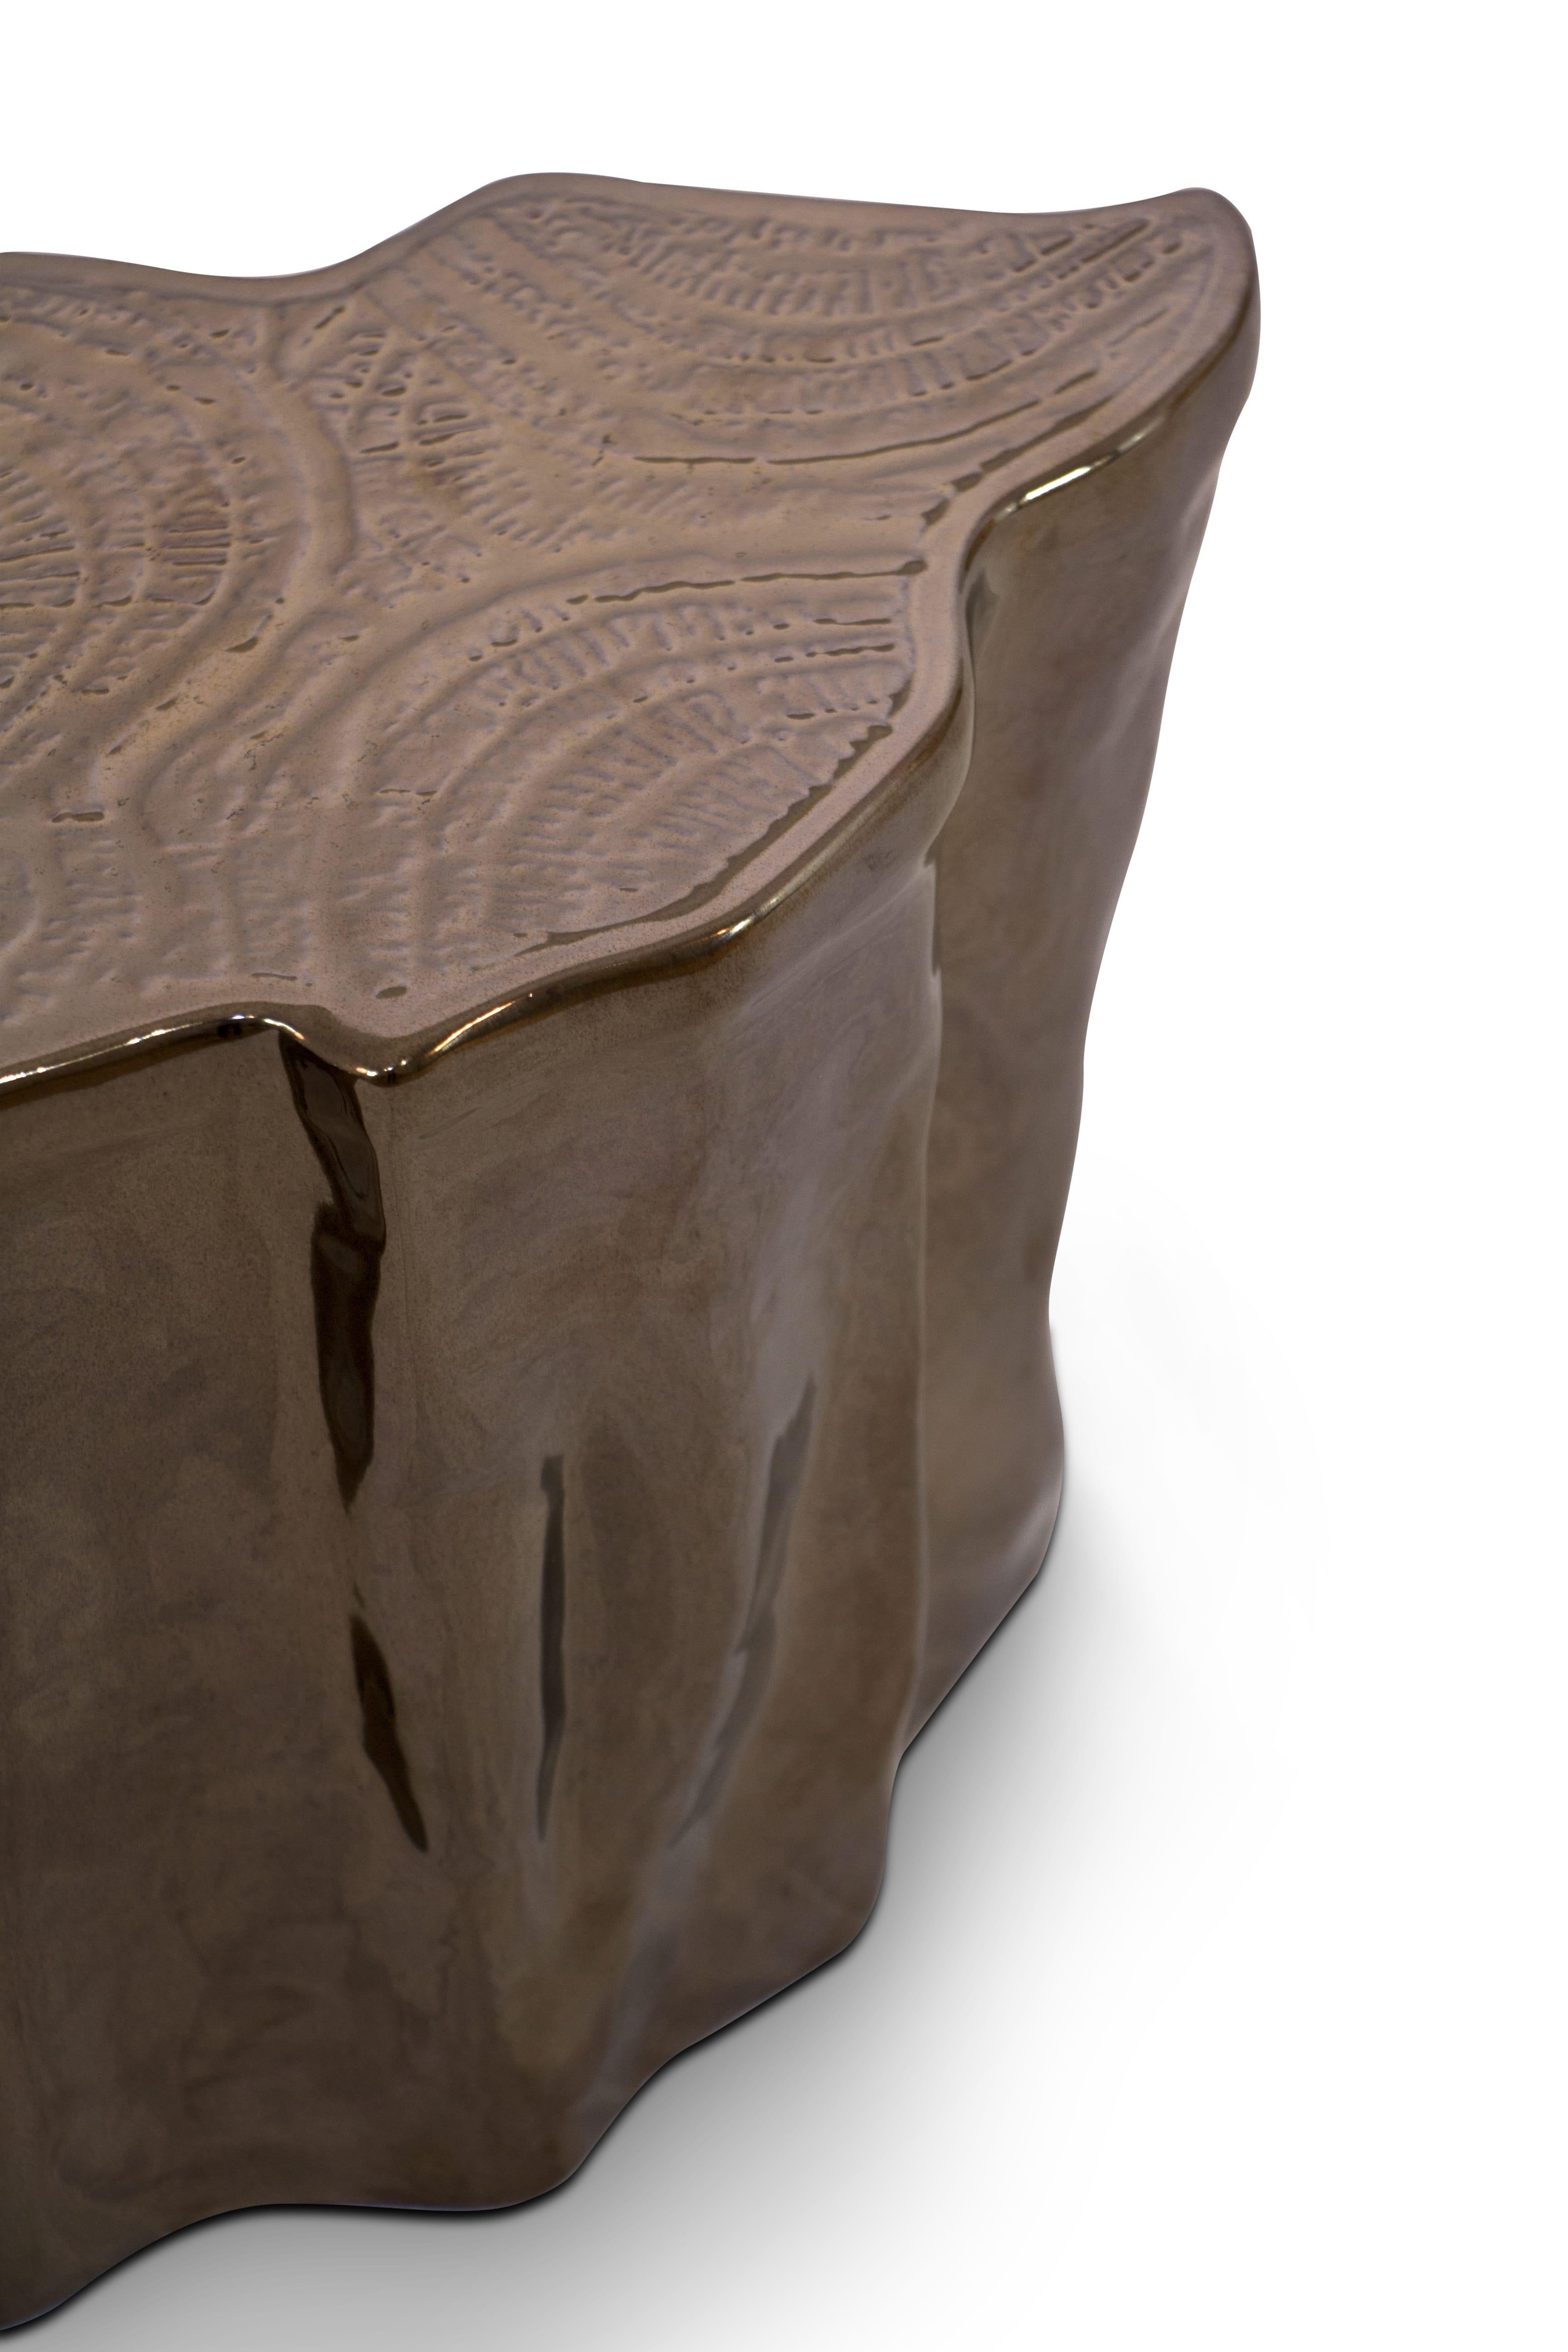 The mystic behind the name inspires Eden. A slice of the tree of life that fell from the Garden of Heaven, this accent coffee table set awakens desire and curiosity with its intriguing cut. 
Born from master artisans and the ancient technique of